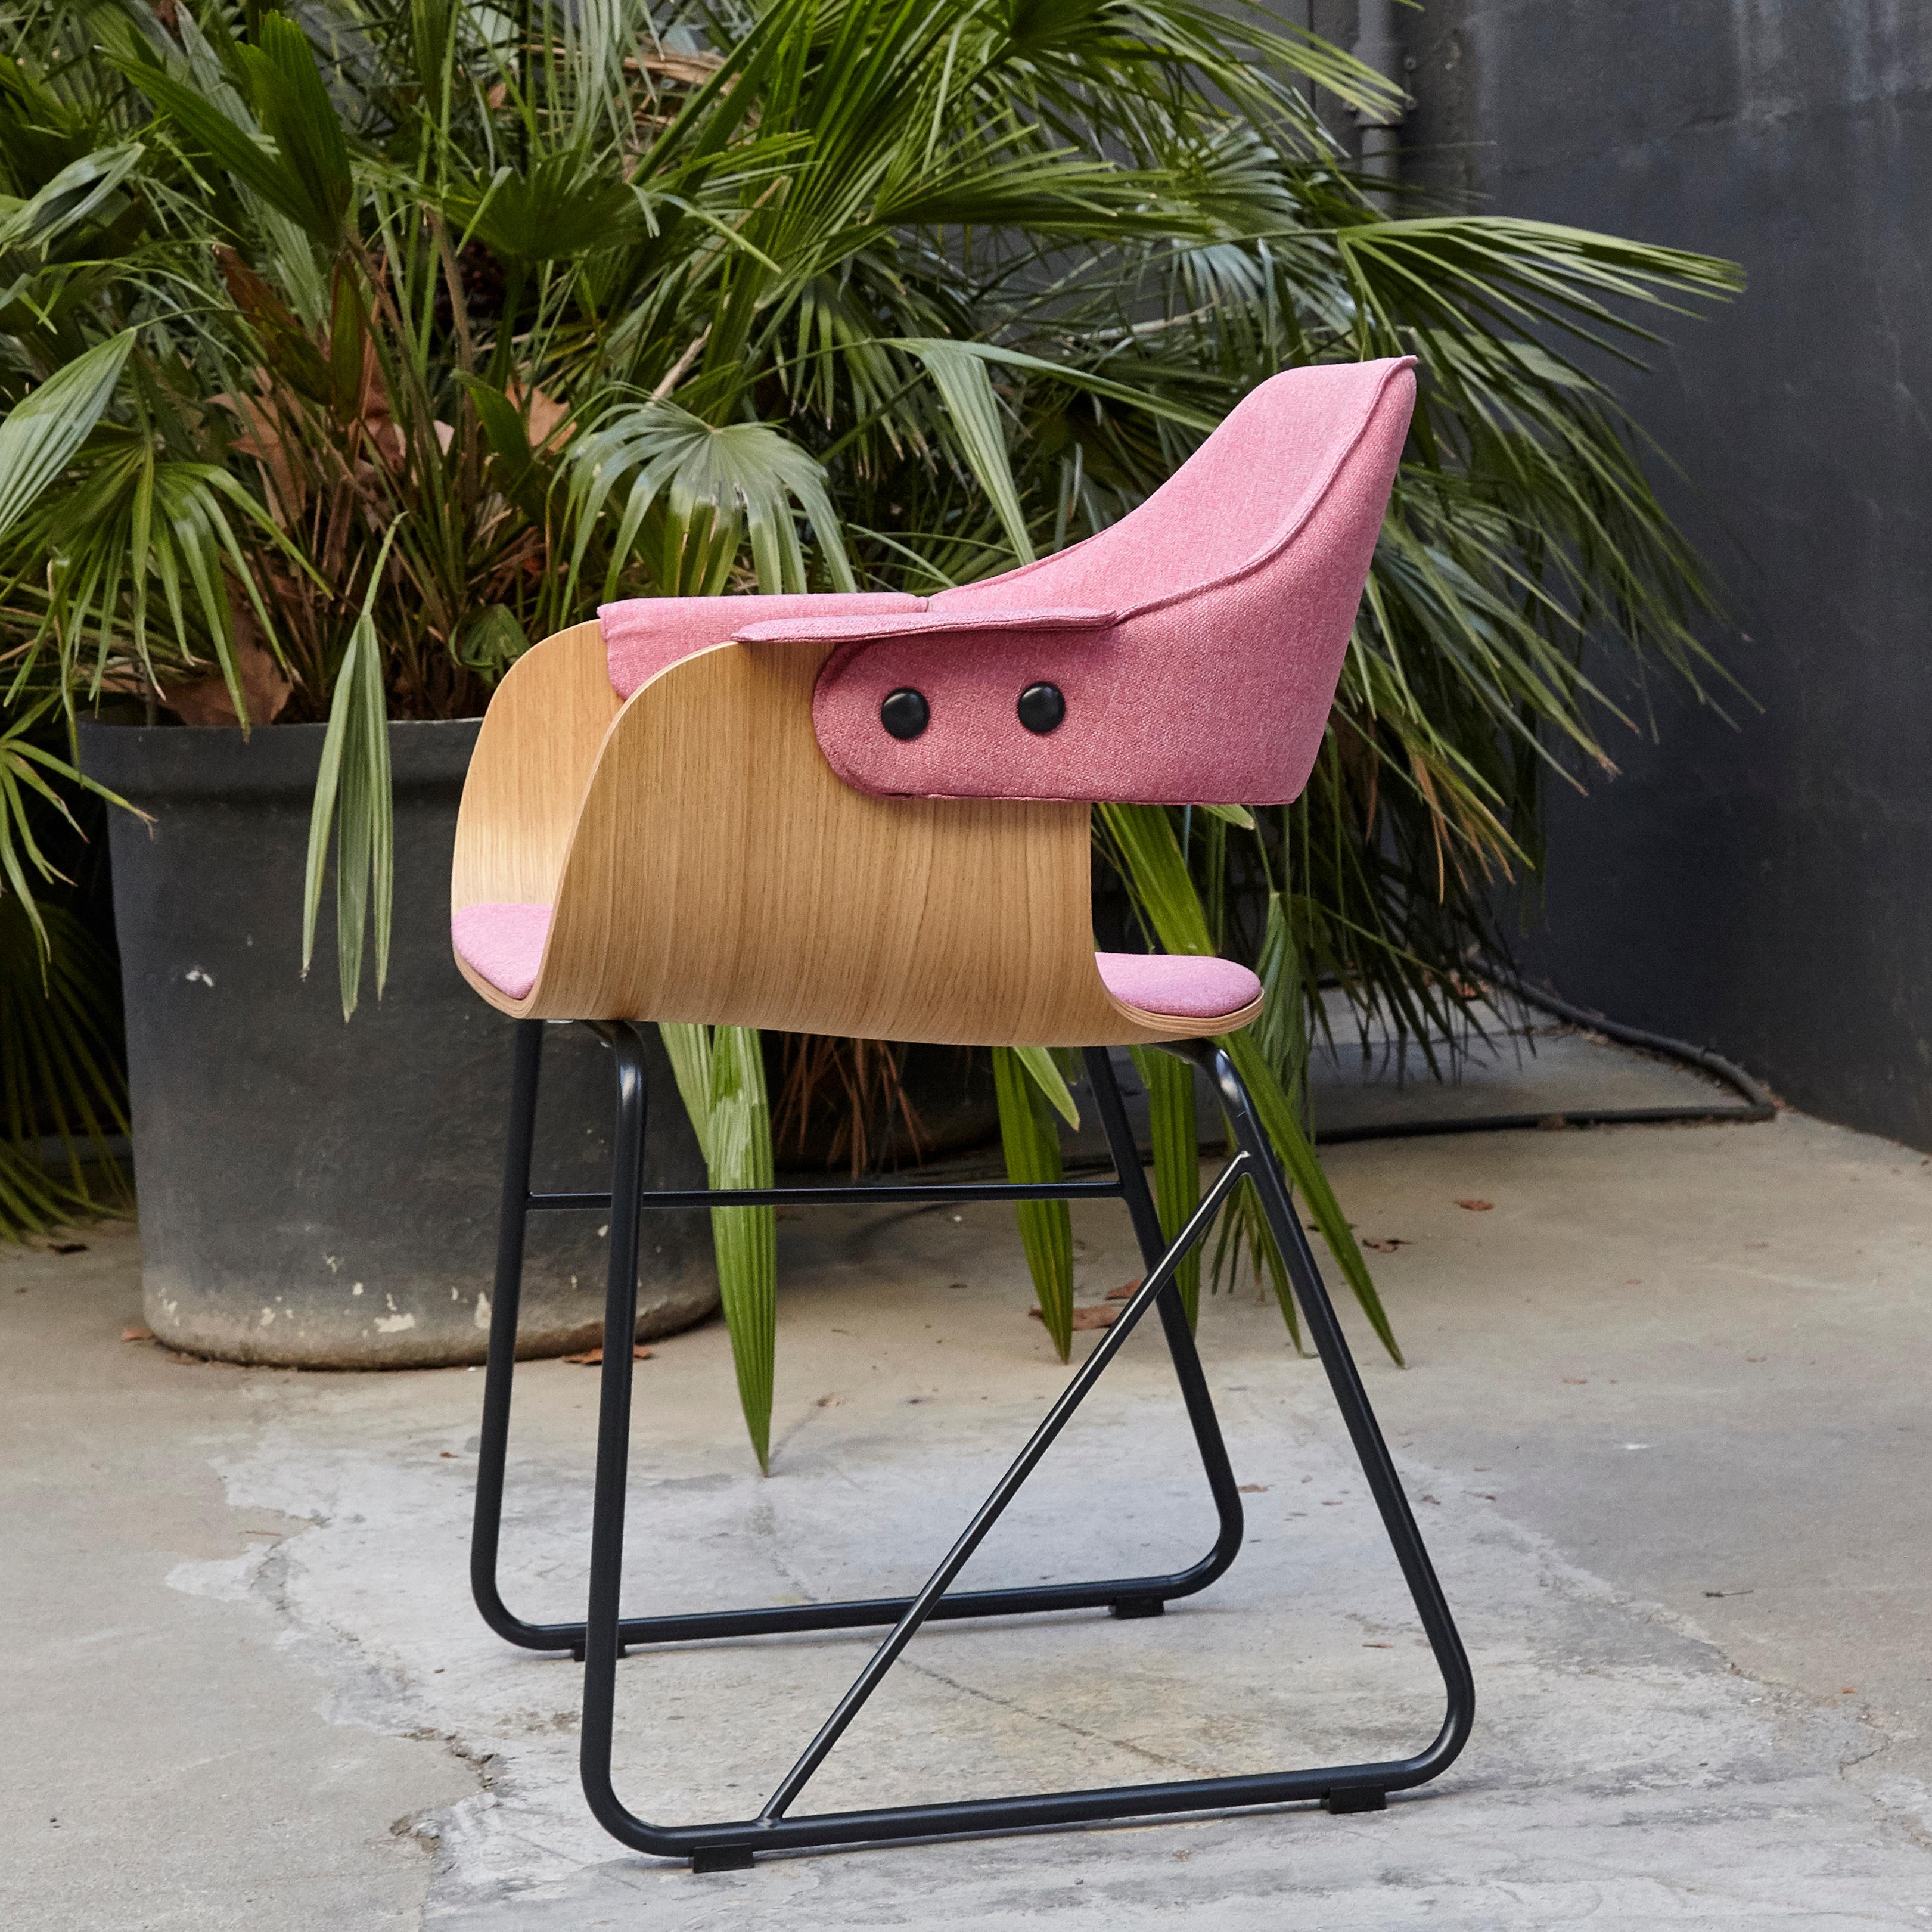 Spanish Jaime Hayon Contemporary Pink Upholstered Wood Chair Showtime by BD Barcelona